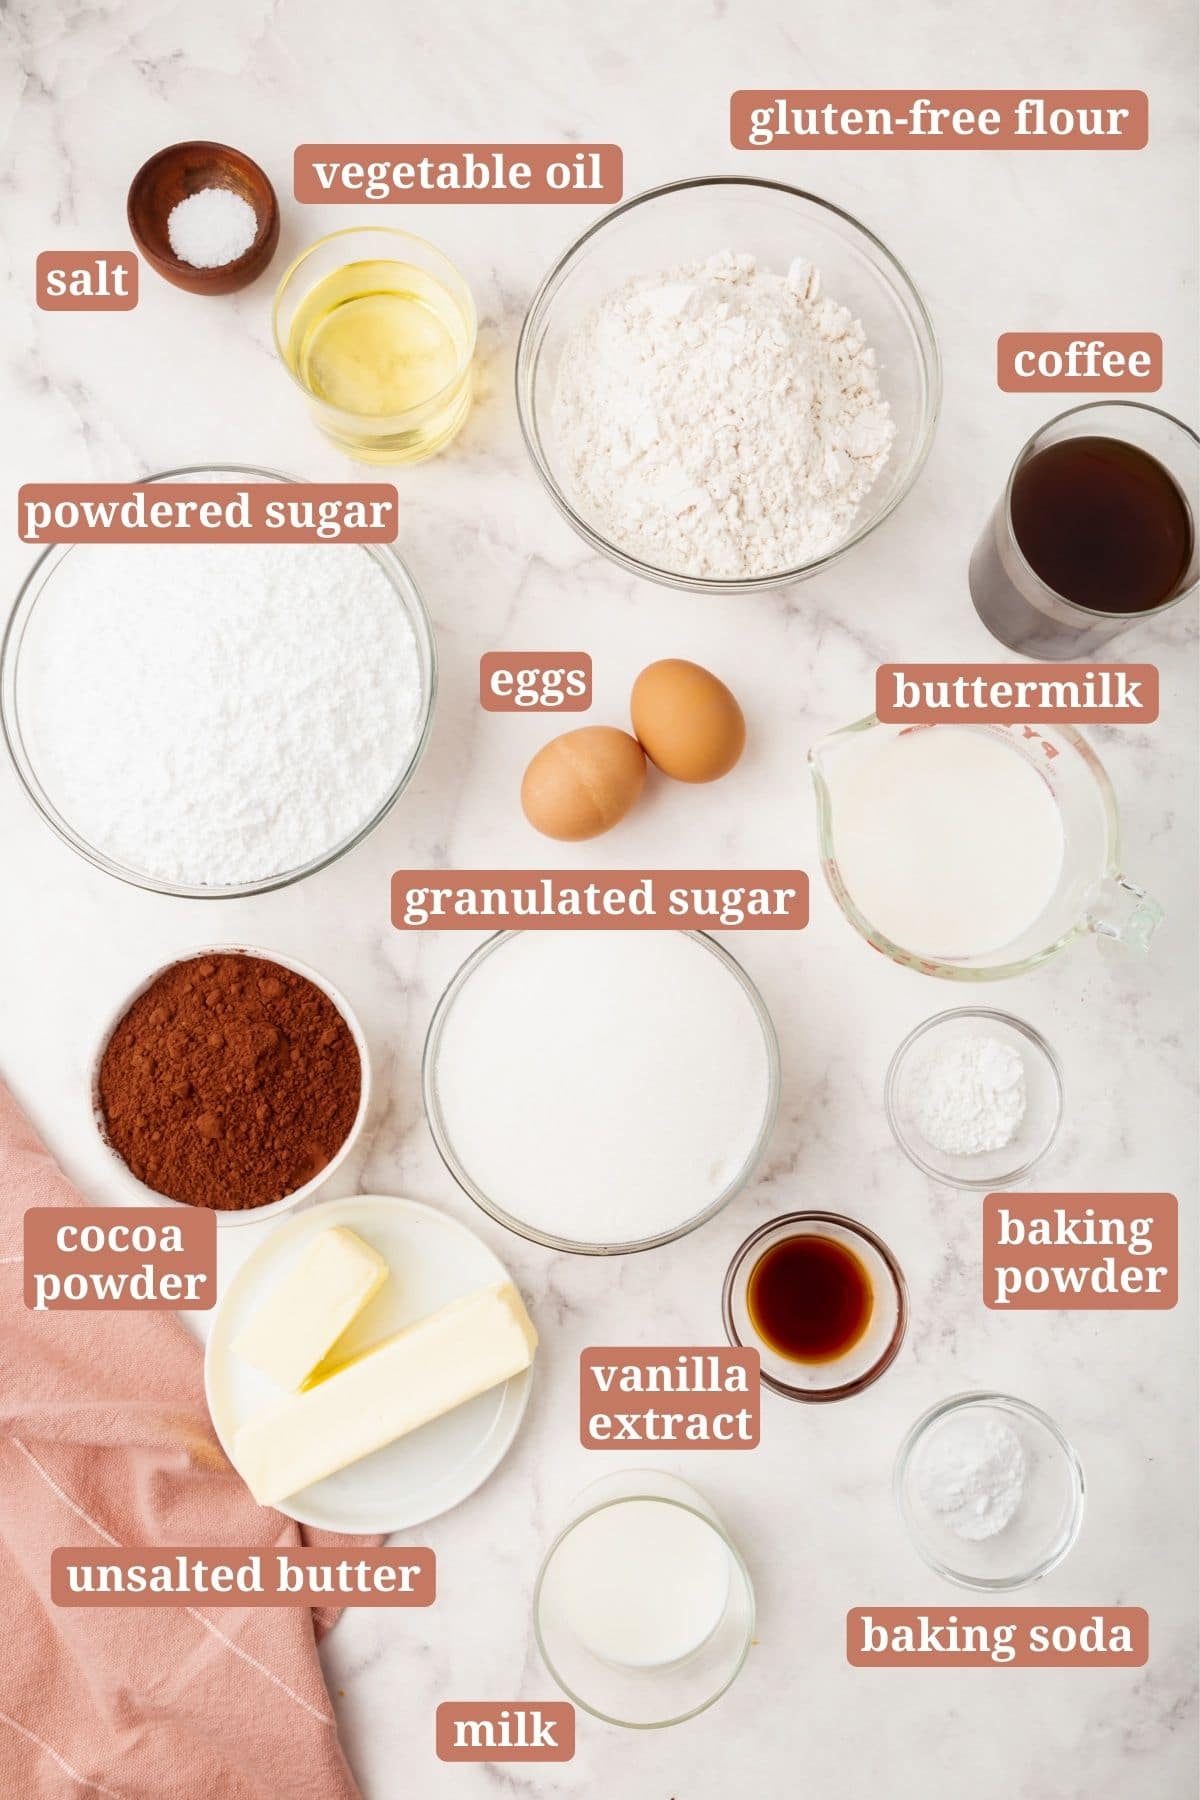 Ingredients for making a gluten-free chocolate cake with chocolate frosting.